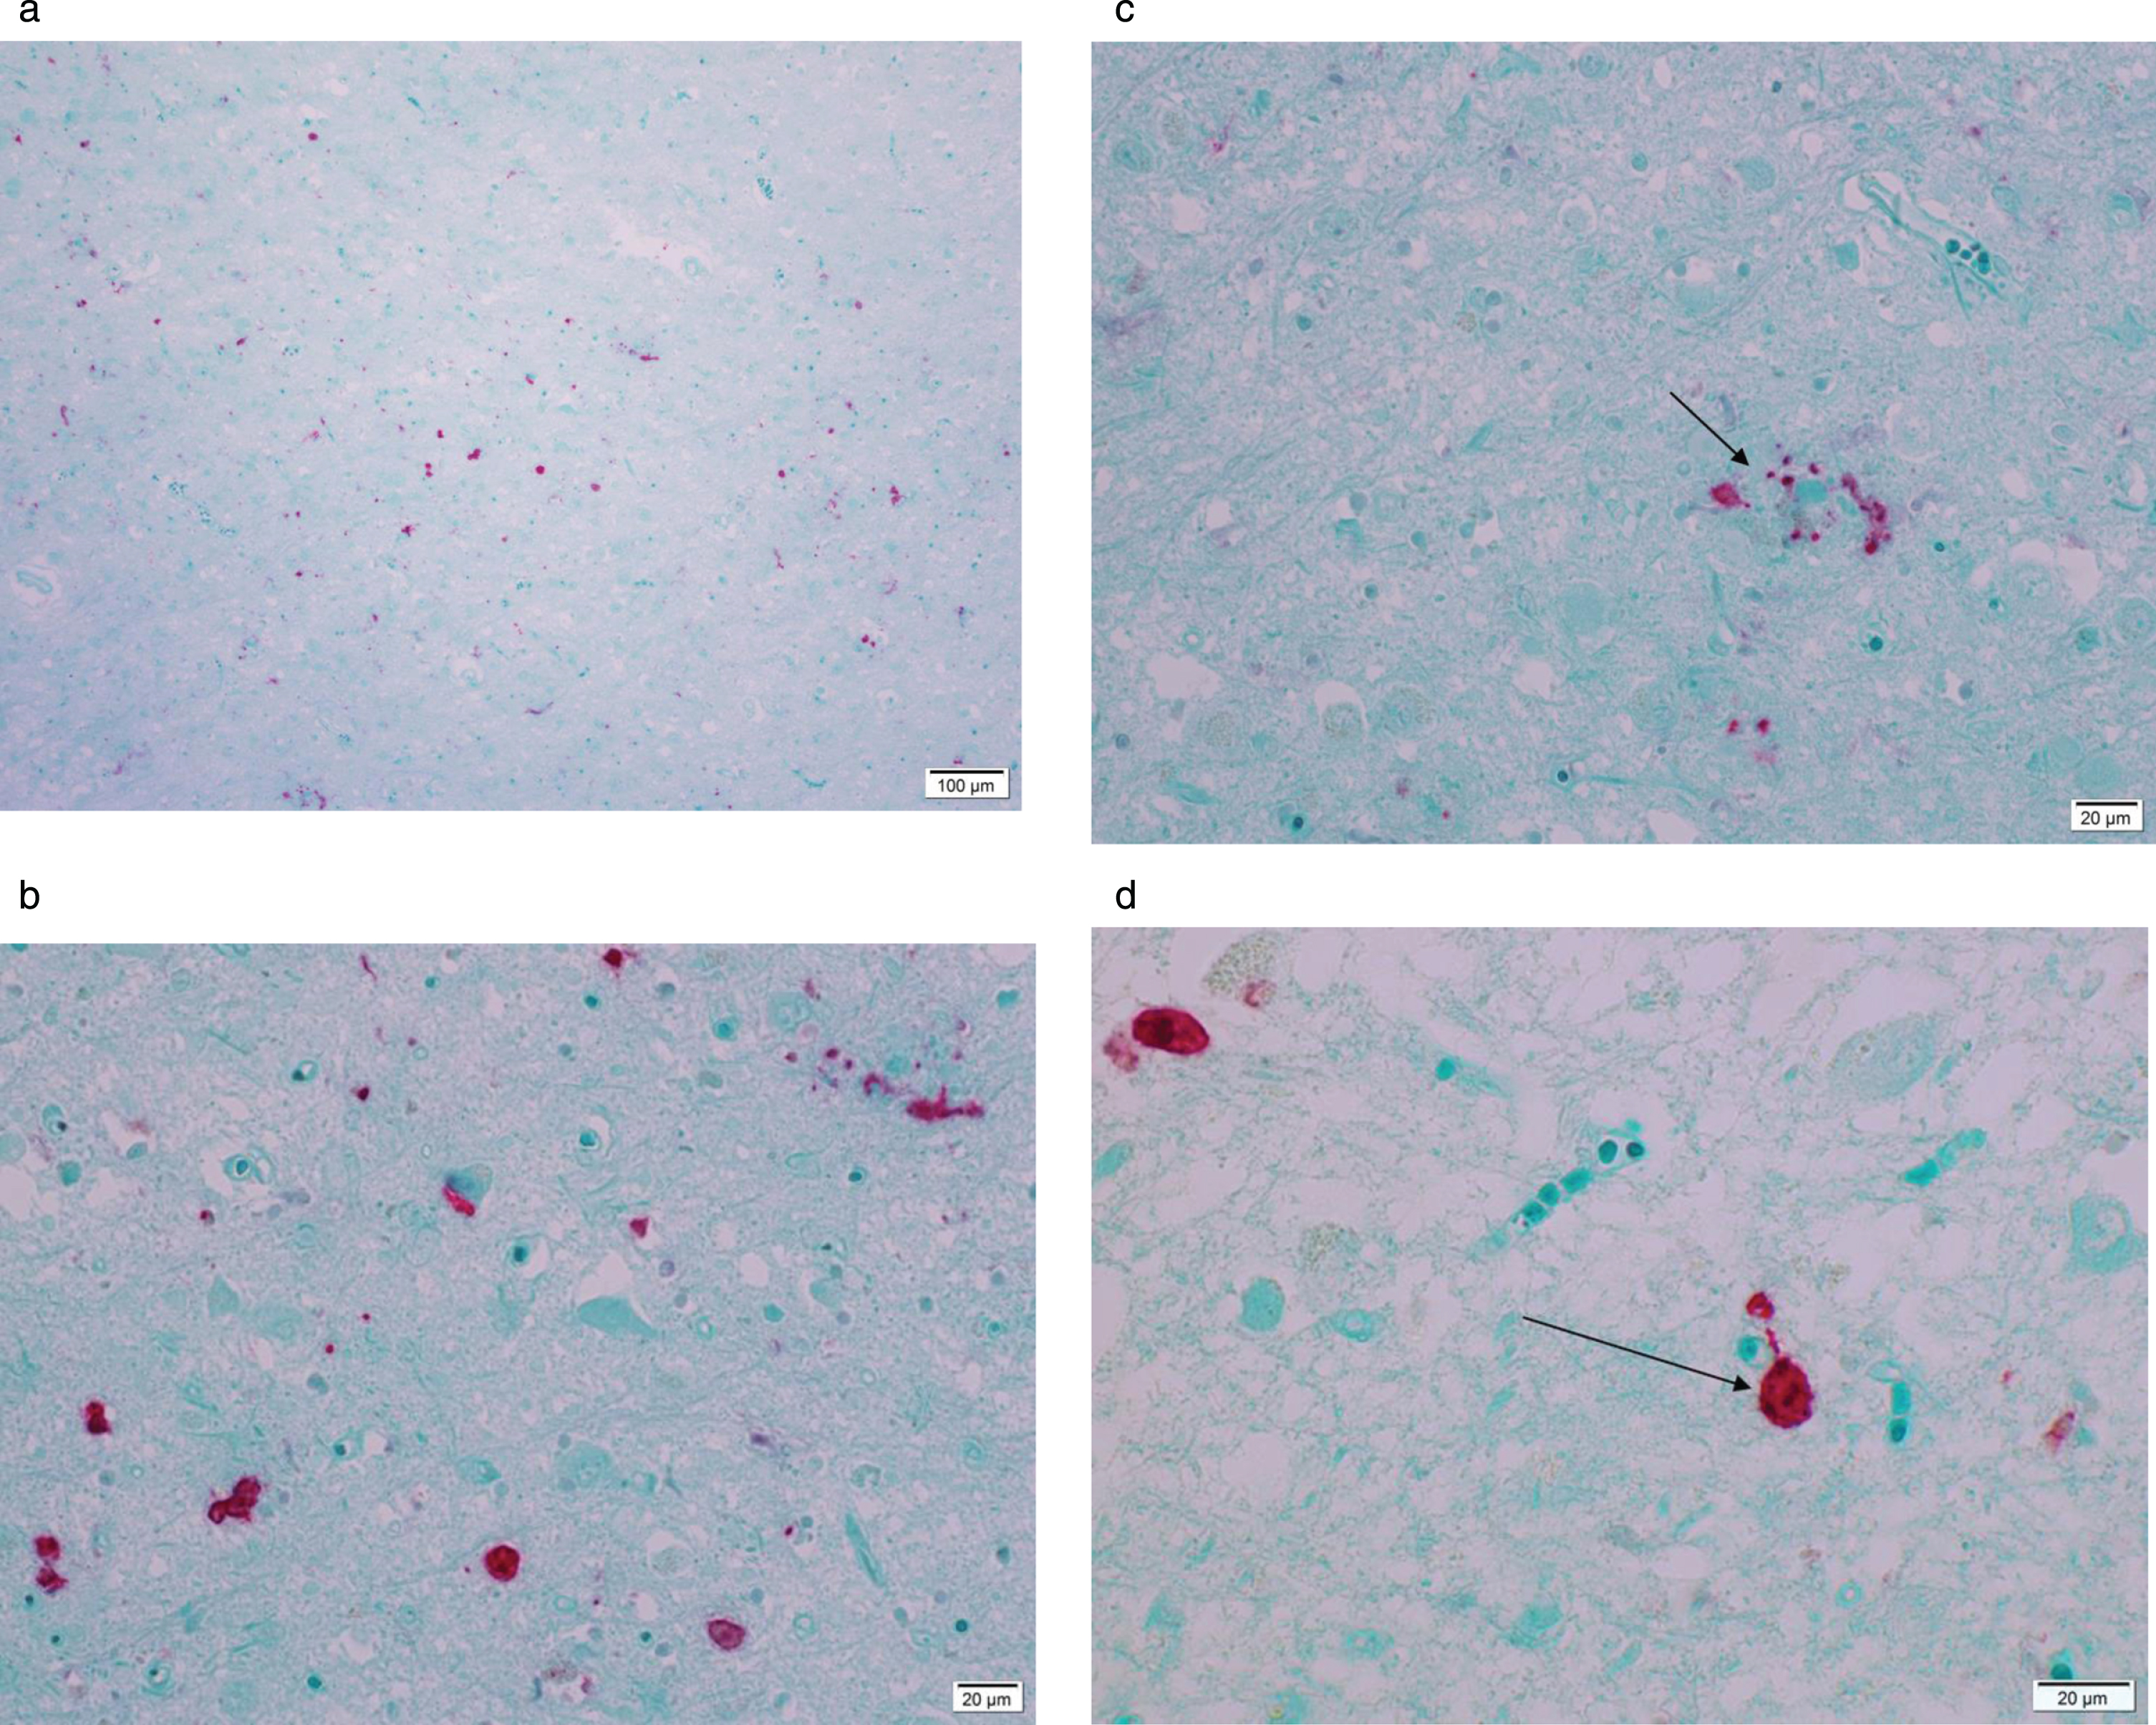 Microphotograph of formalin-fixed tissue from a 79-year-old patient diagnosed with Alzheimer’s disease staining positive using rabbit anti-Ljungan virus VP1 antibodies. Red stain visualizes presence of viral antigen. Panel A is an overview and Panel B is a magnification of the same region of the hippocampus. Red staining marks presence of viral antigen in neurons, astrocytes, and glial cells. In Panel C, an amyloid/neuritic plaque (marked with an arrow) in shown staining positive in the glial compartment and in dystrophic neurites. Panel D shows positive staining in neurons (marked with an arrow).